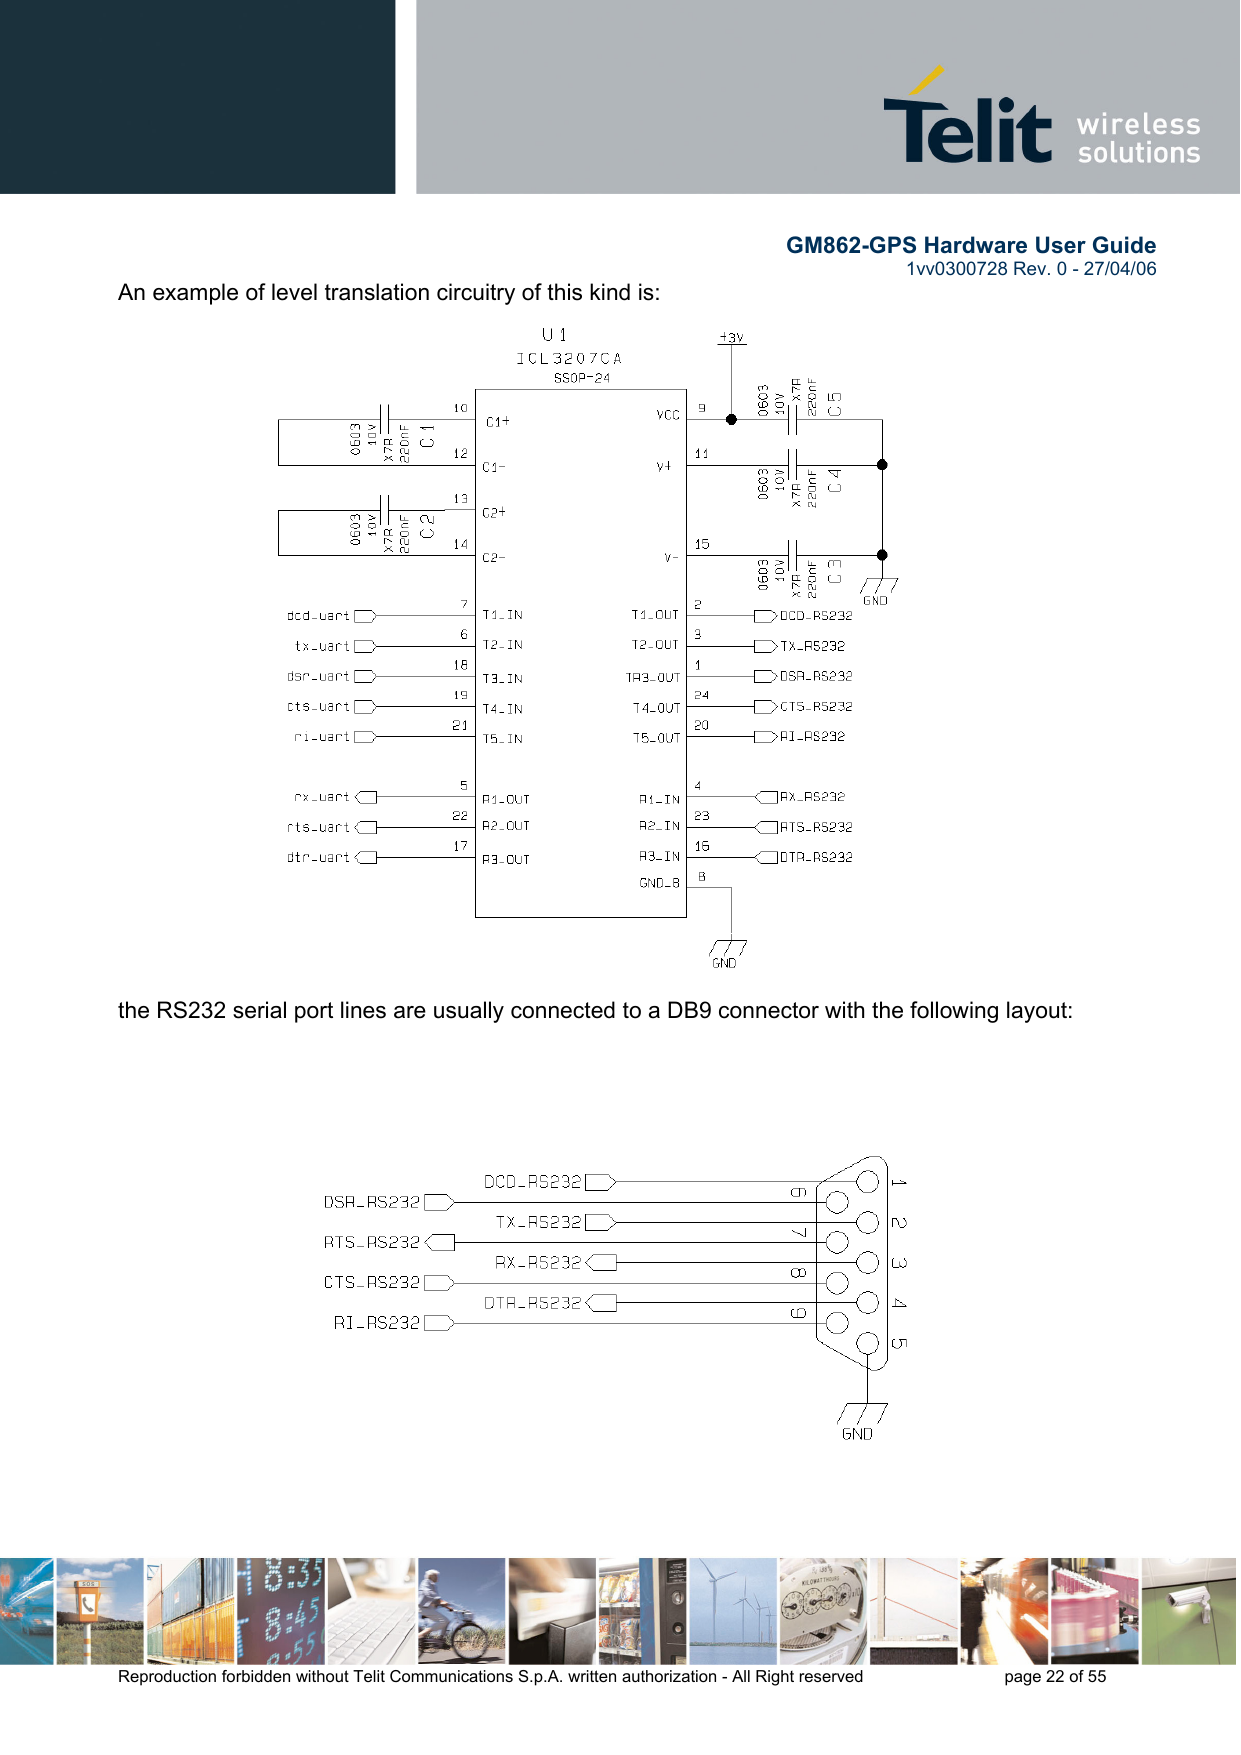        GM862-GPS Hardware User Guide   1vv0300728 Rev. 0 - 27/04/06    Reproduction forbidden without Telit Communications S.p.A. written authorization - All Right reserved    page 22 of 55  An example of level translation circuitry of this kind is:  the RS232 serial port lines are usually connected to a DB9 connector with the following layout: 